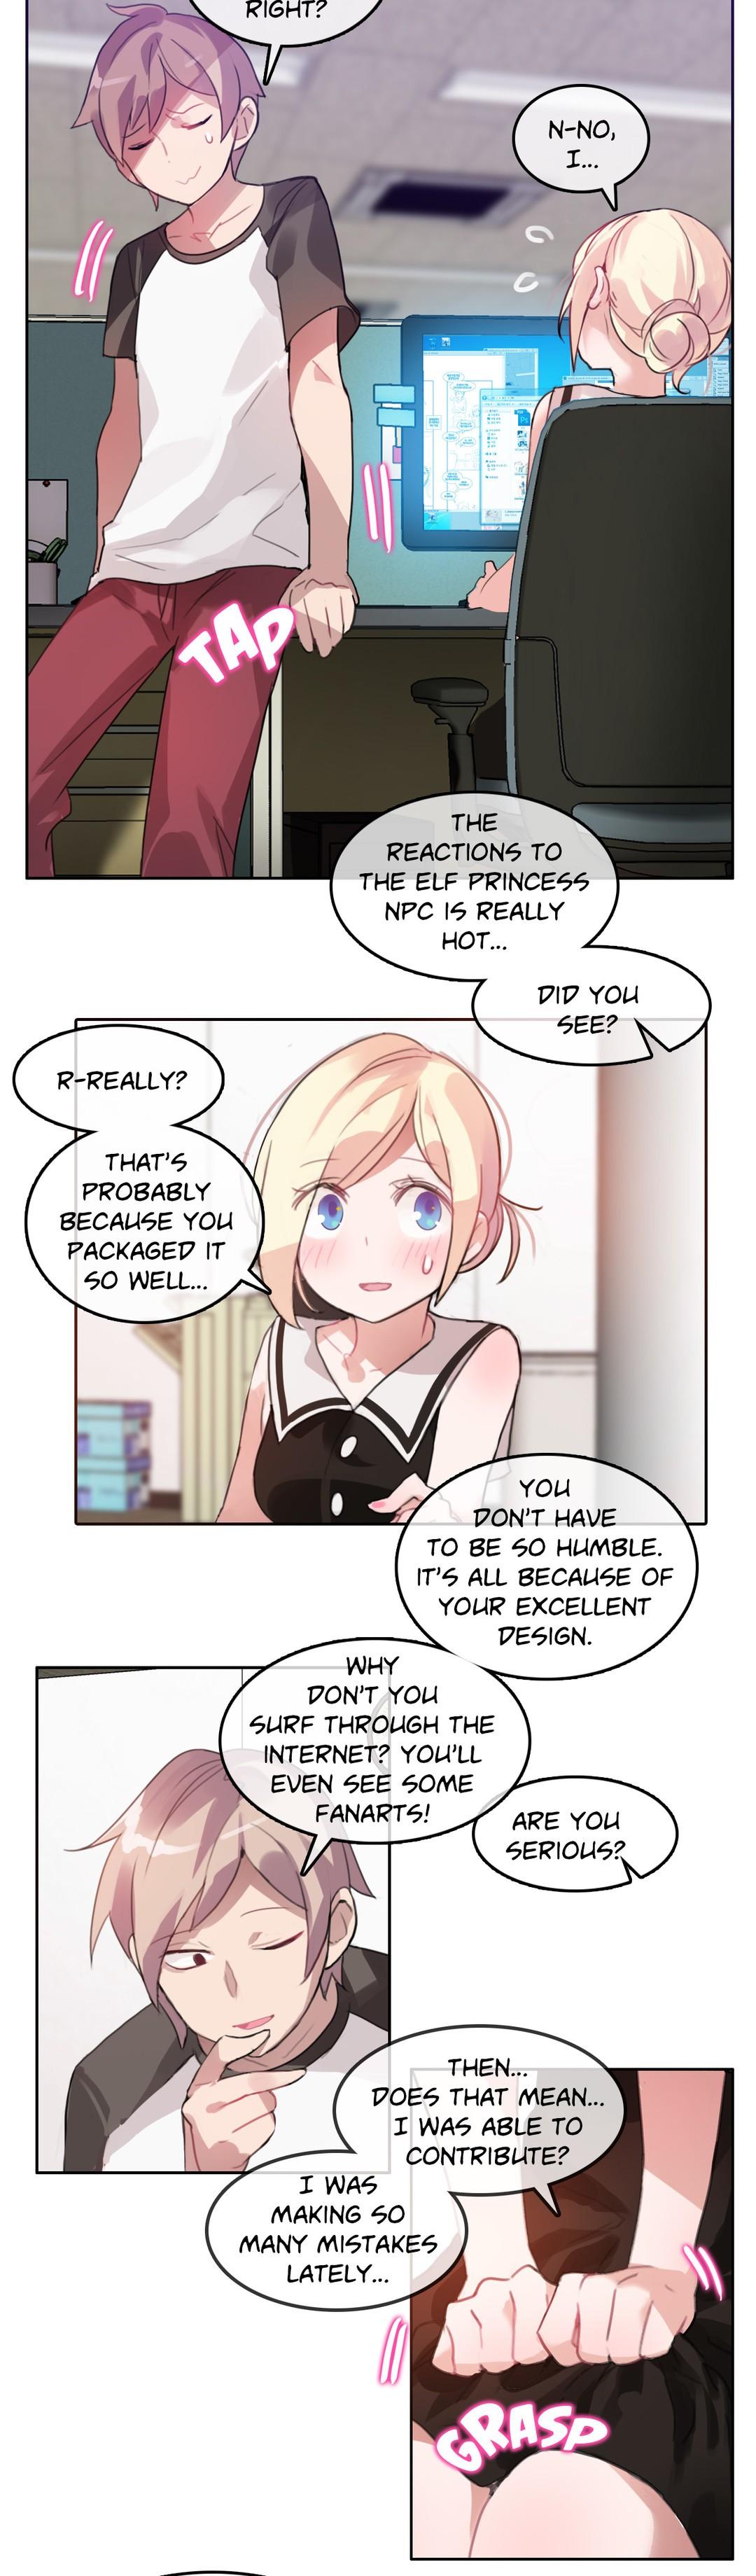 A Pervert's Daily Life Ch. 1-34 274